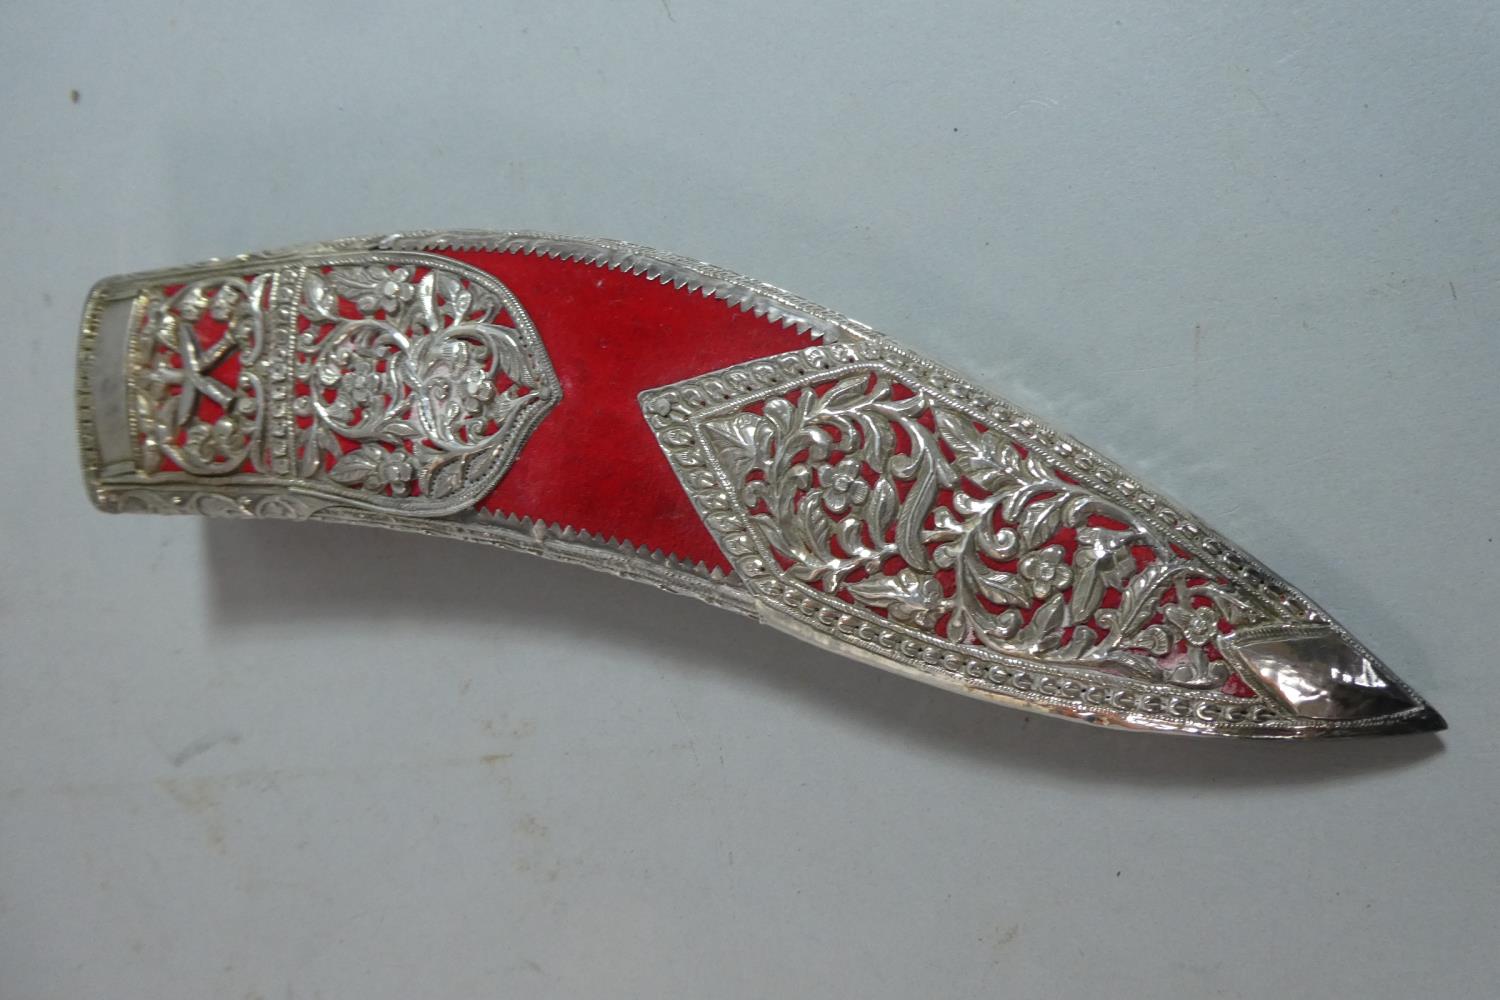 A Souvenir Kukri Knife with Daggers, in Silver Plate Mounted Scabbard - Image 4 of 4